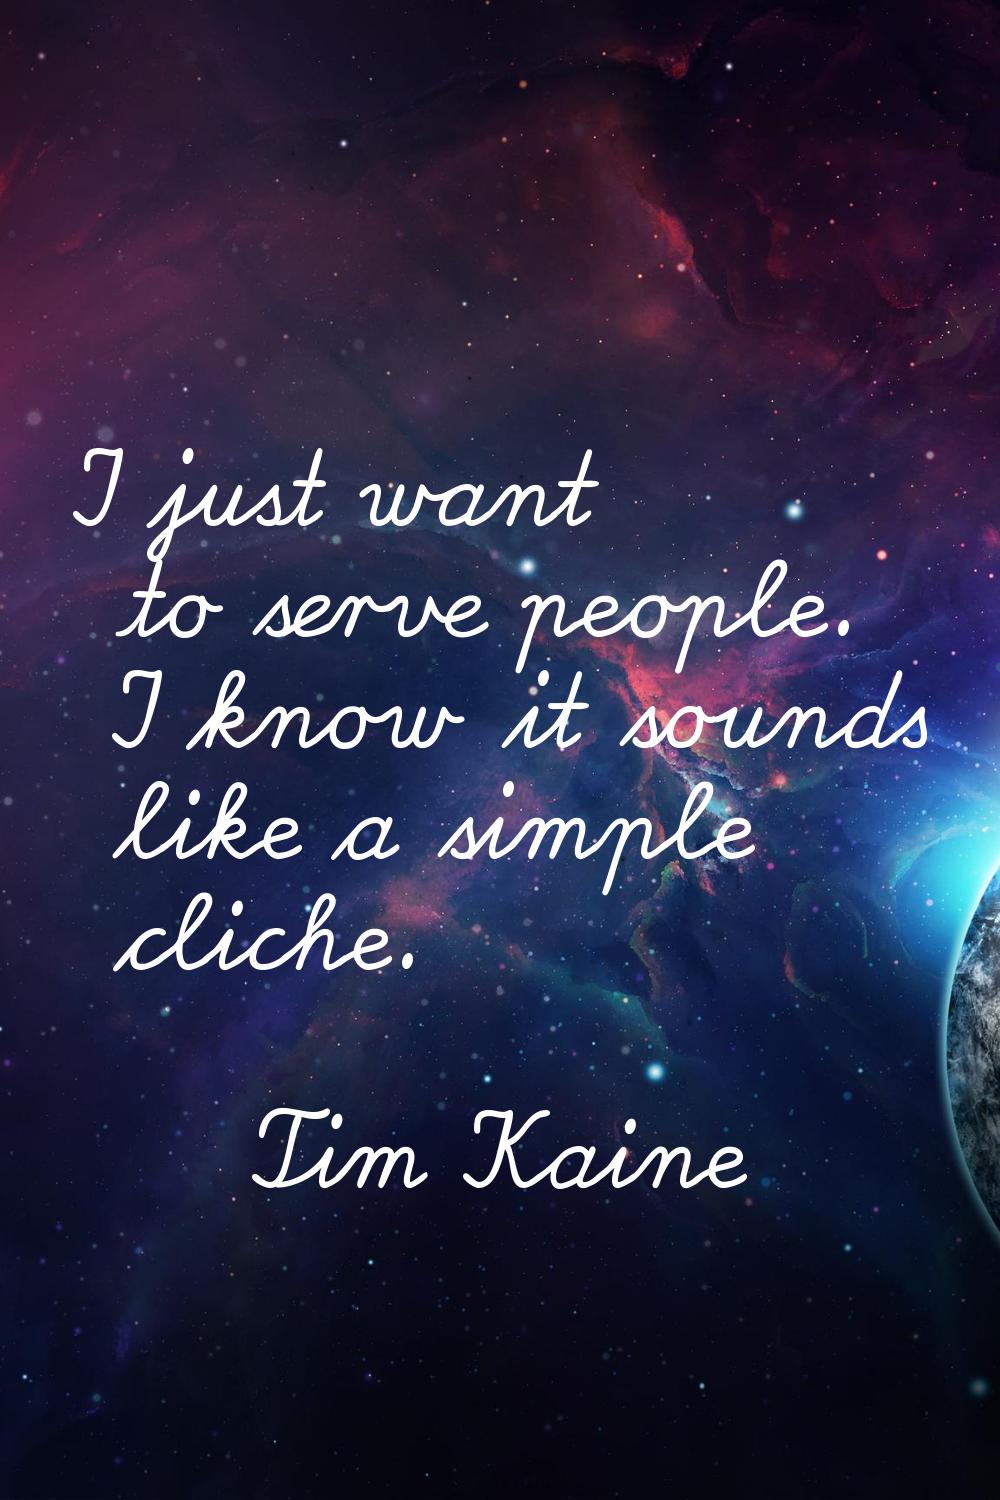 I just want to serve people. I know it sounds like a simple cliche.